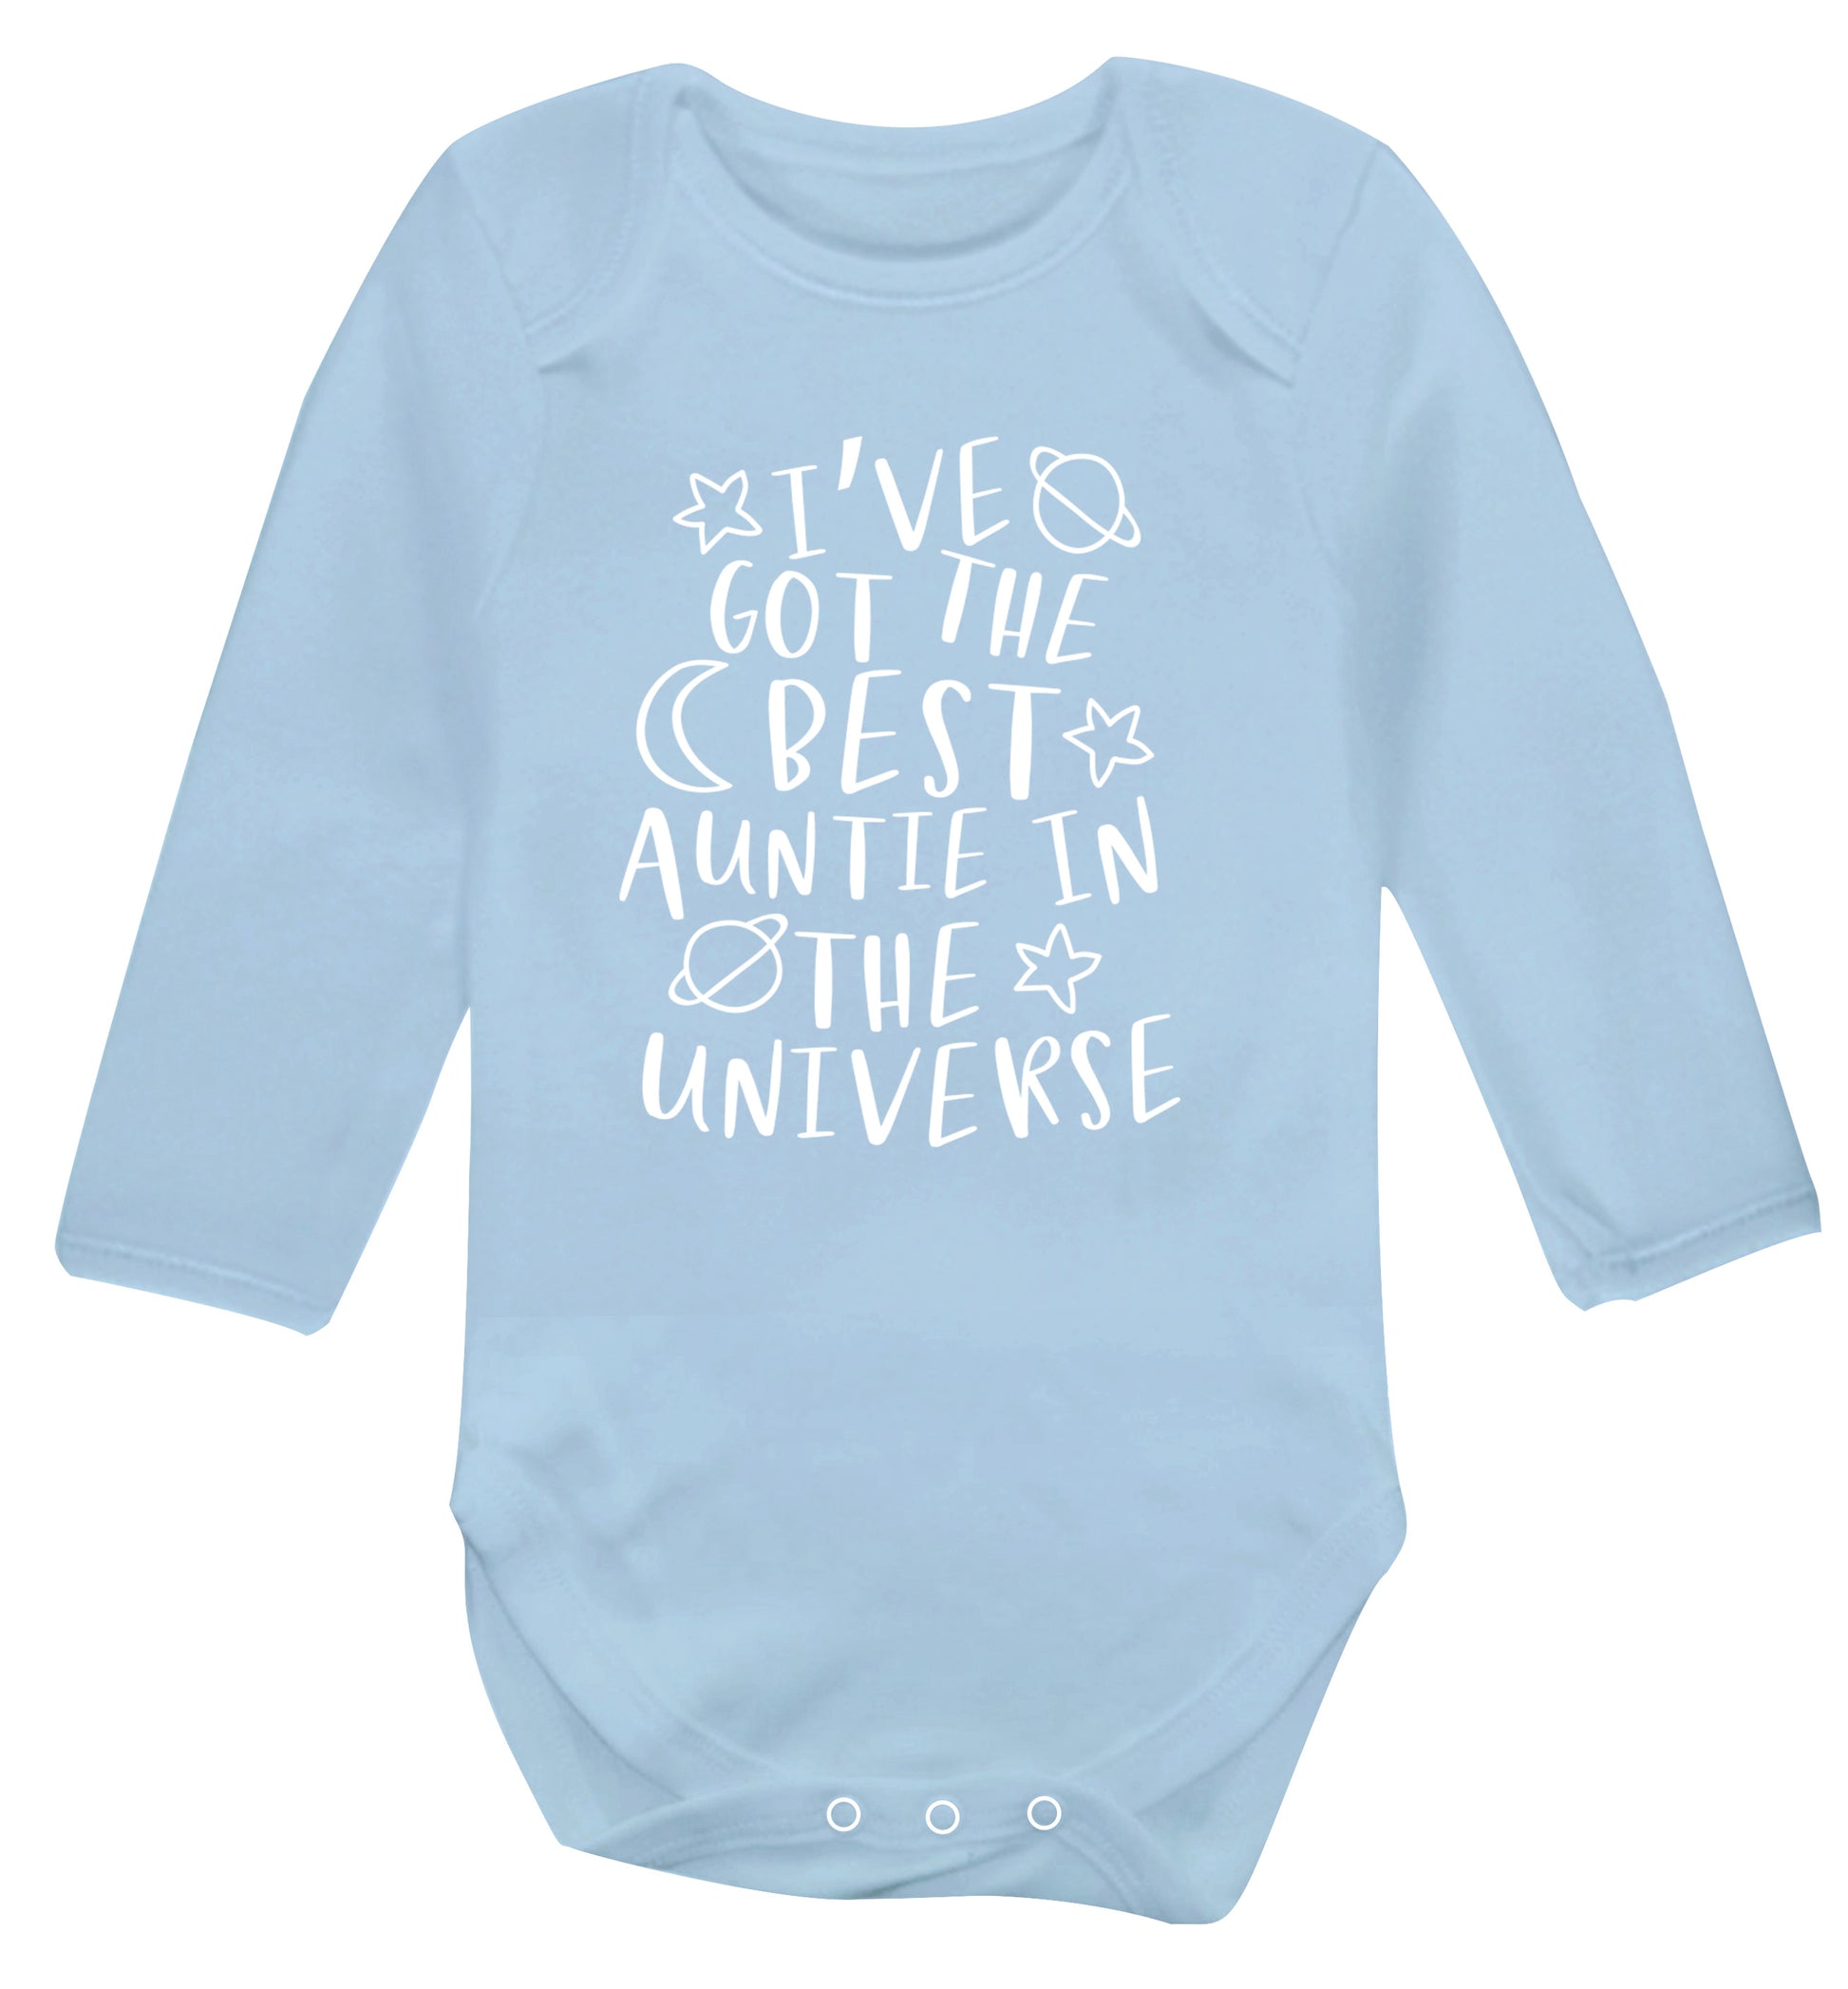 I've got the best auntie in the universe Baby Vest long sleeved pale blue 6-12 months